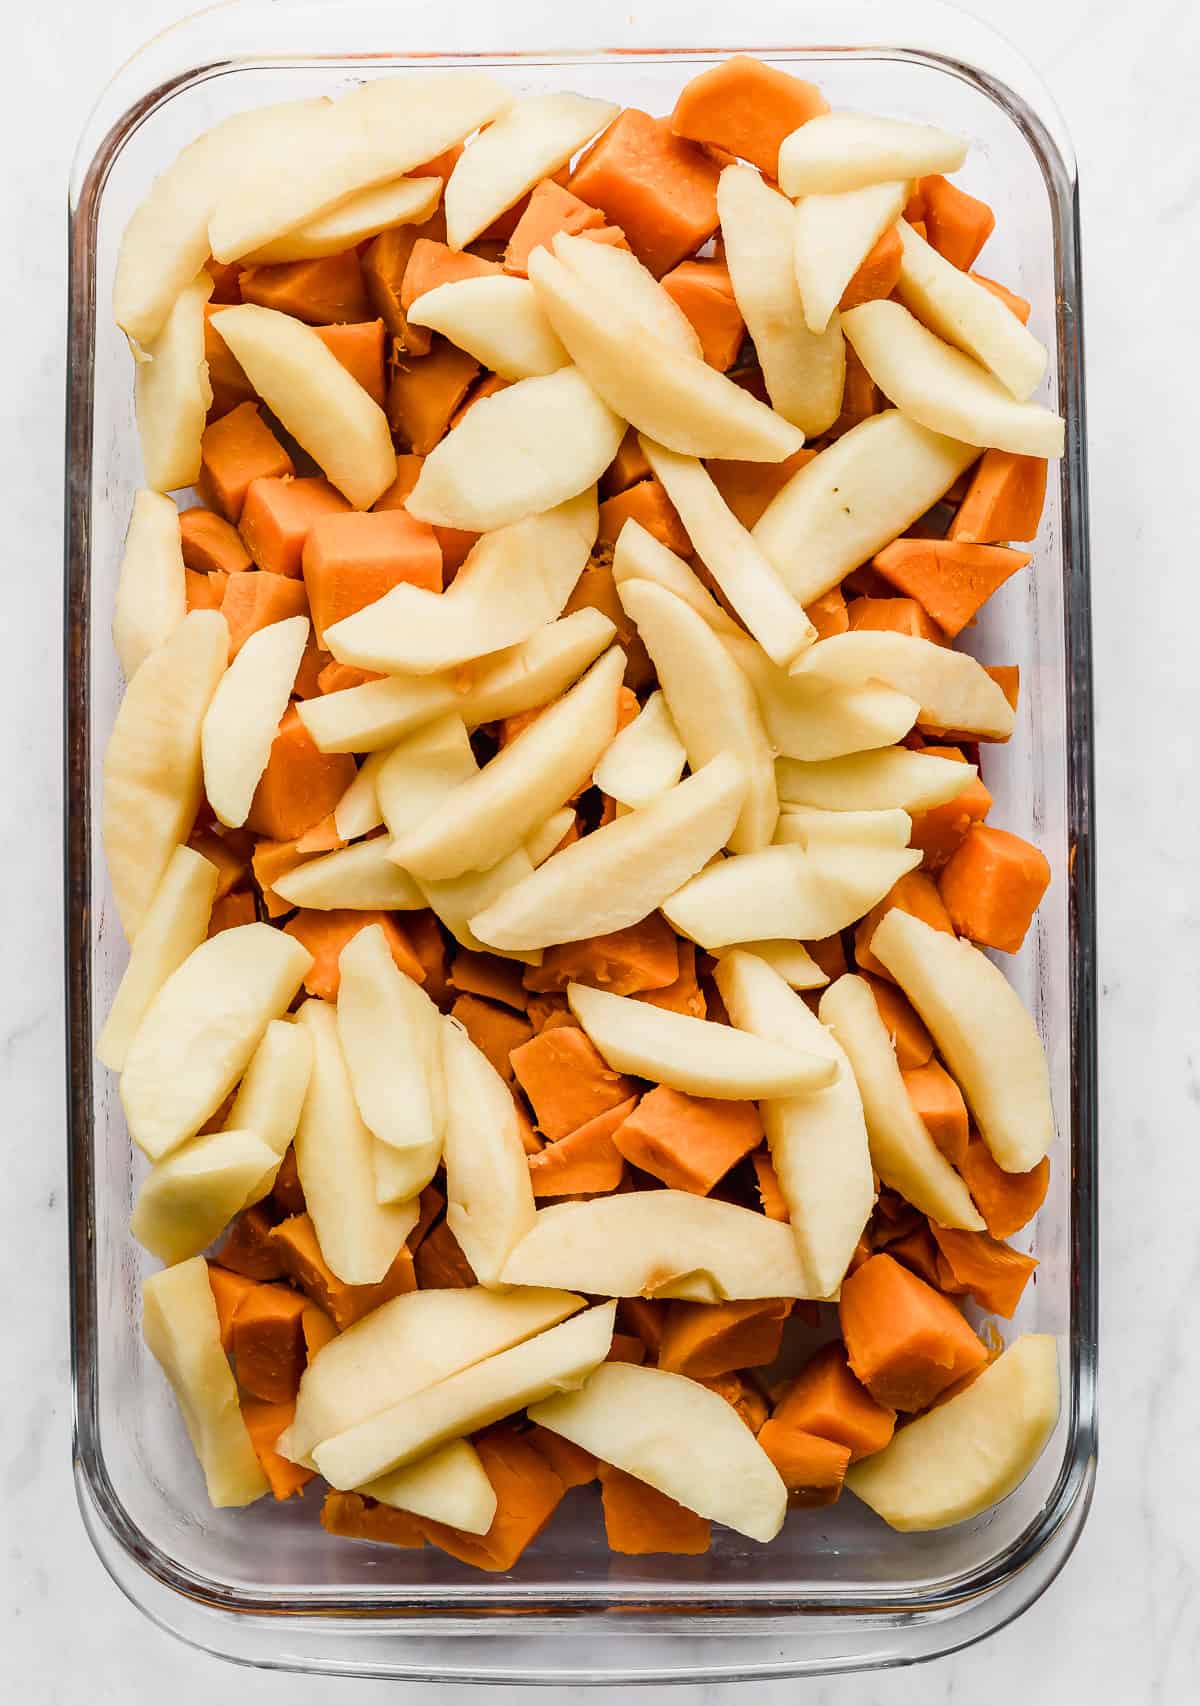 Sliced apples overtop cubed sweet potatoes, in a glass casserole dish.